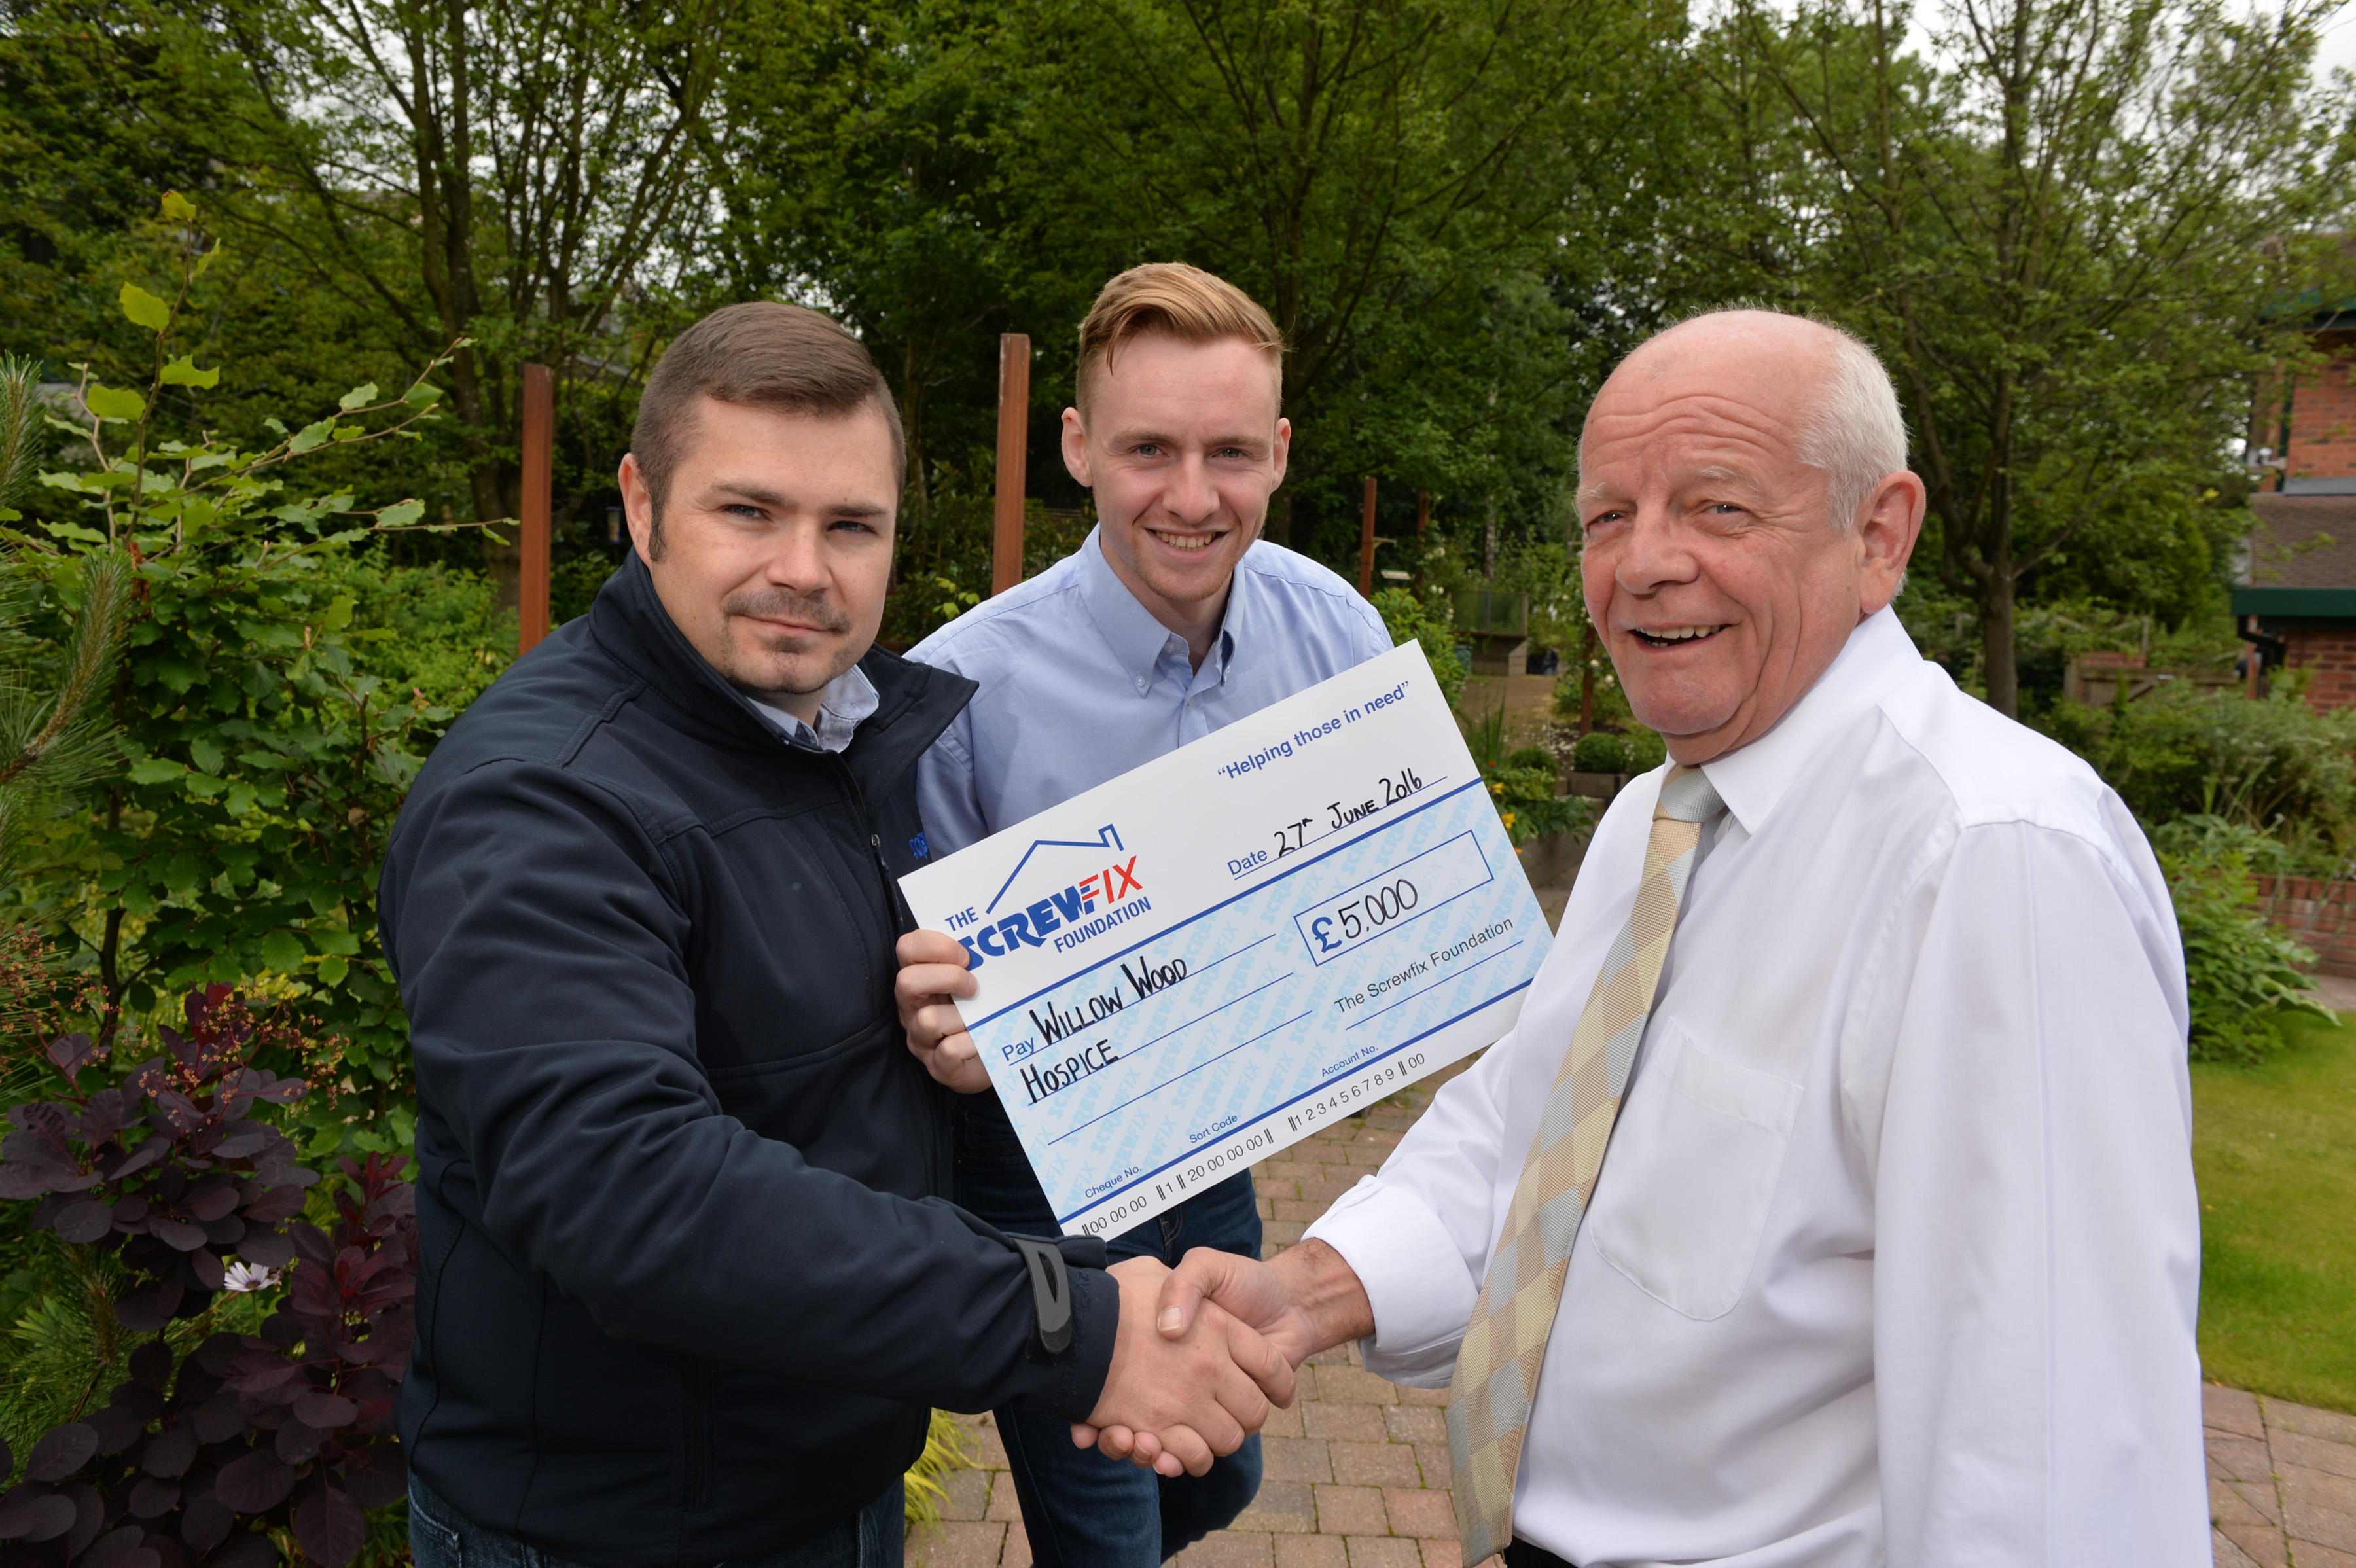 Ashton-Under-Lyne based charity gets a helping hand from the Screwfix Foundation